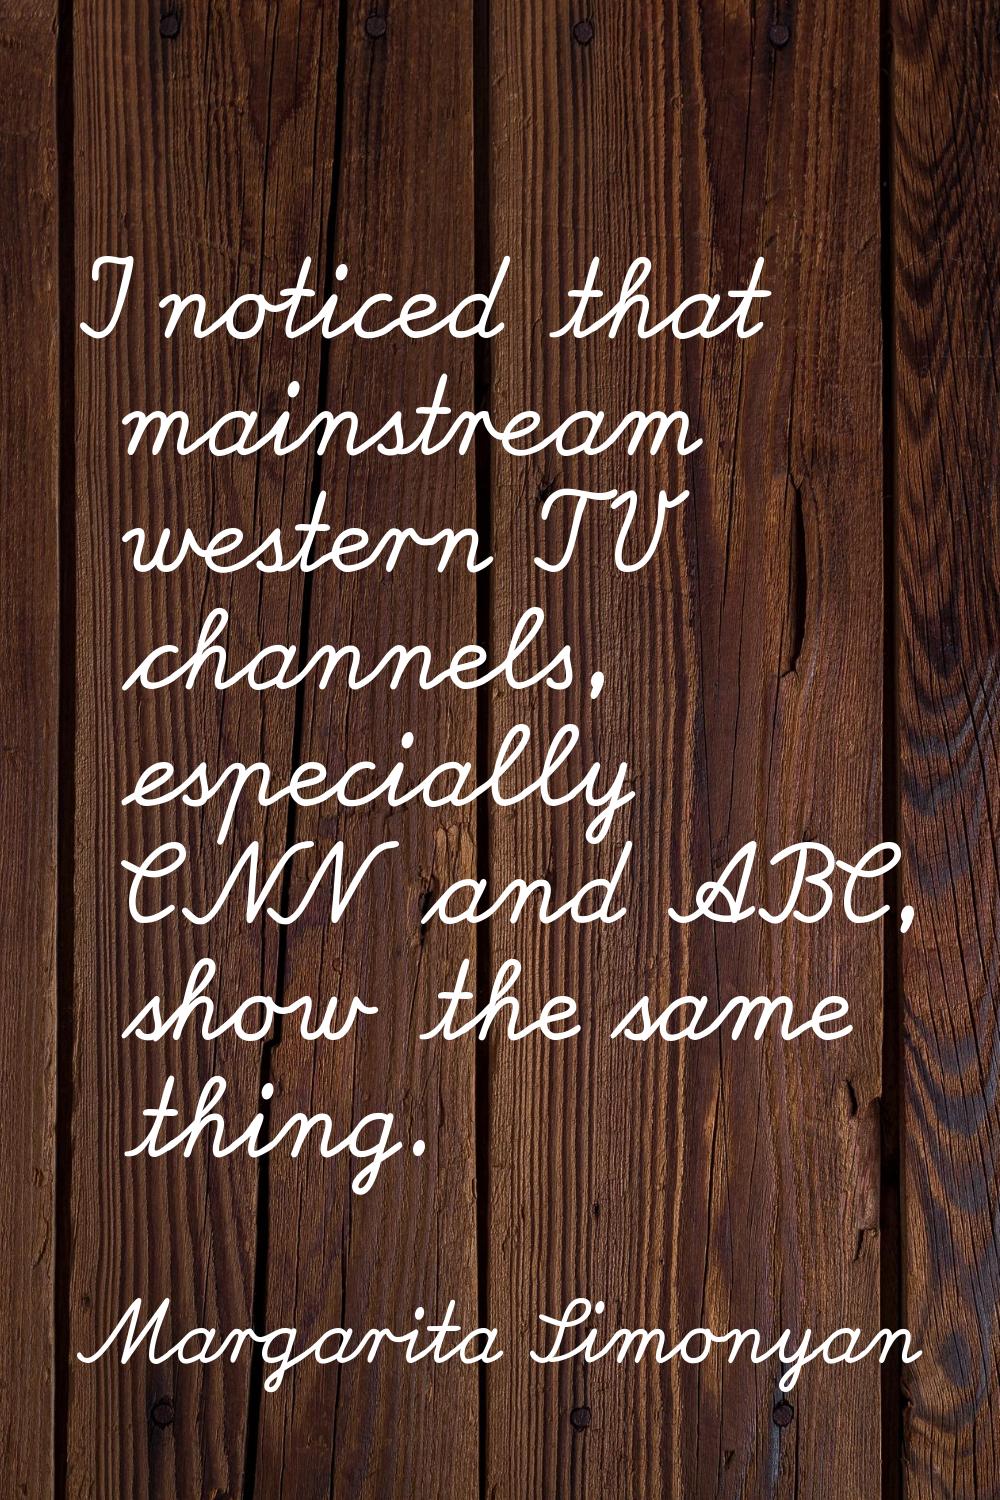 I noticed that mainstream western TV channels, especially CNN and ABC, show the same thing.